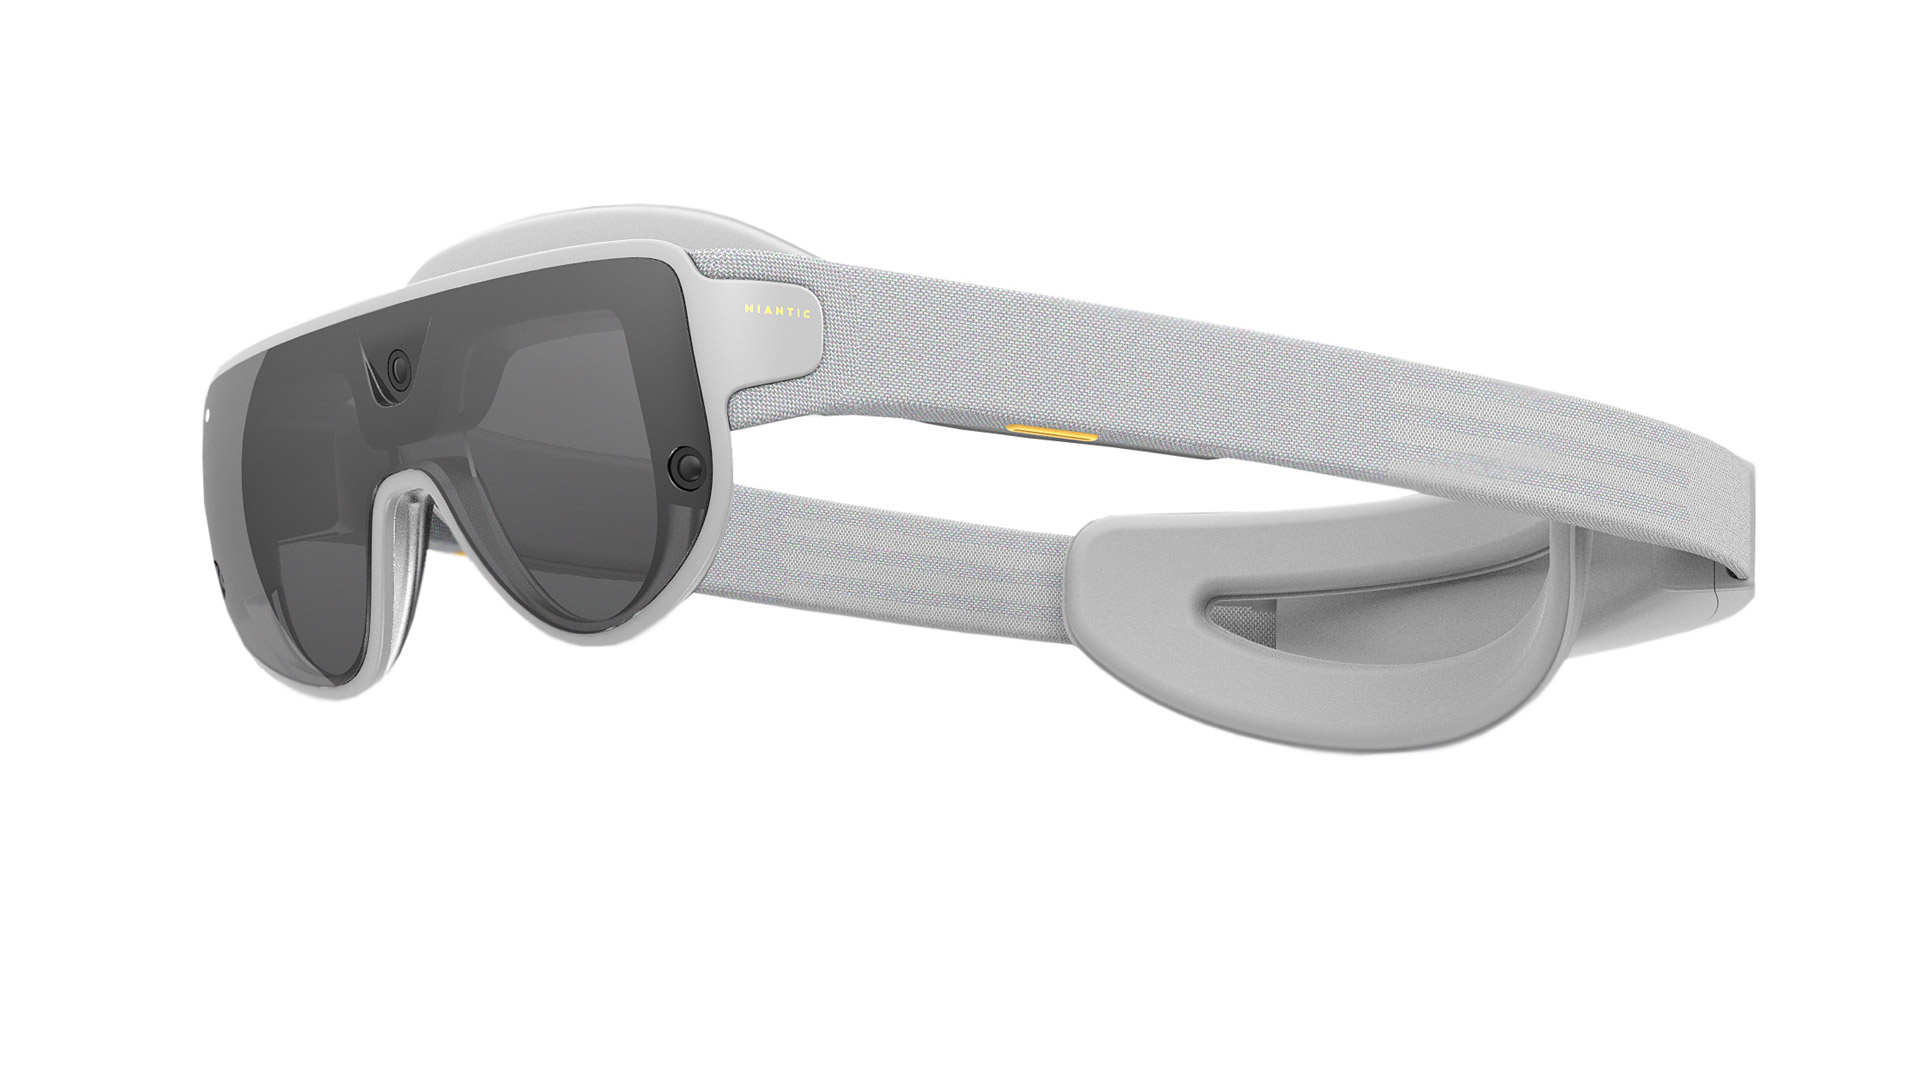 New smart glasses coming from Qualcomm and Pokemon Go creator Niantic - CNET